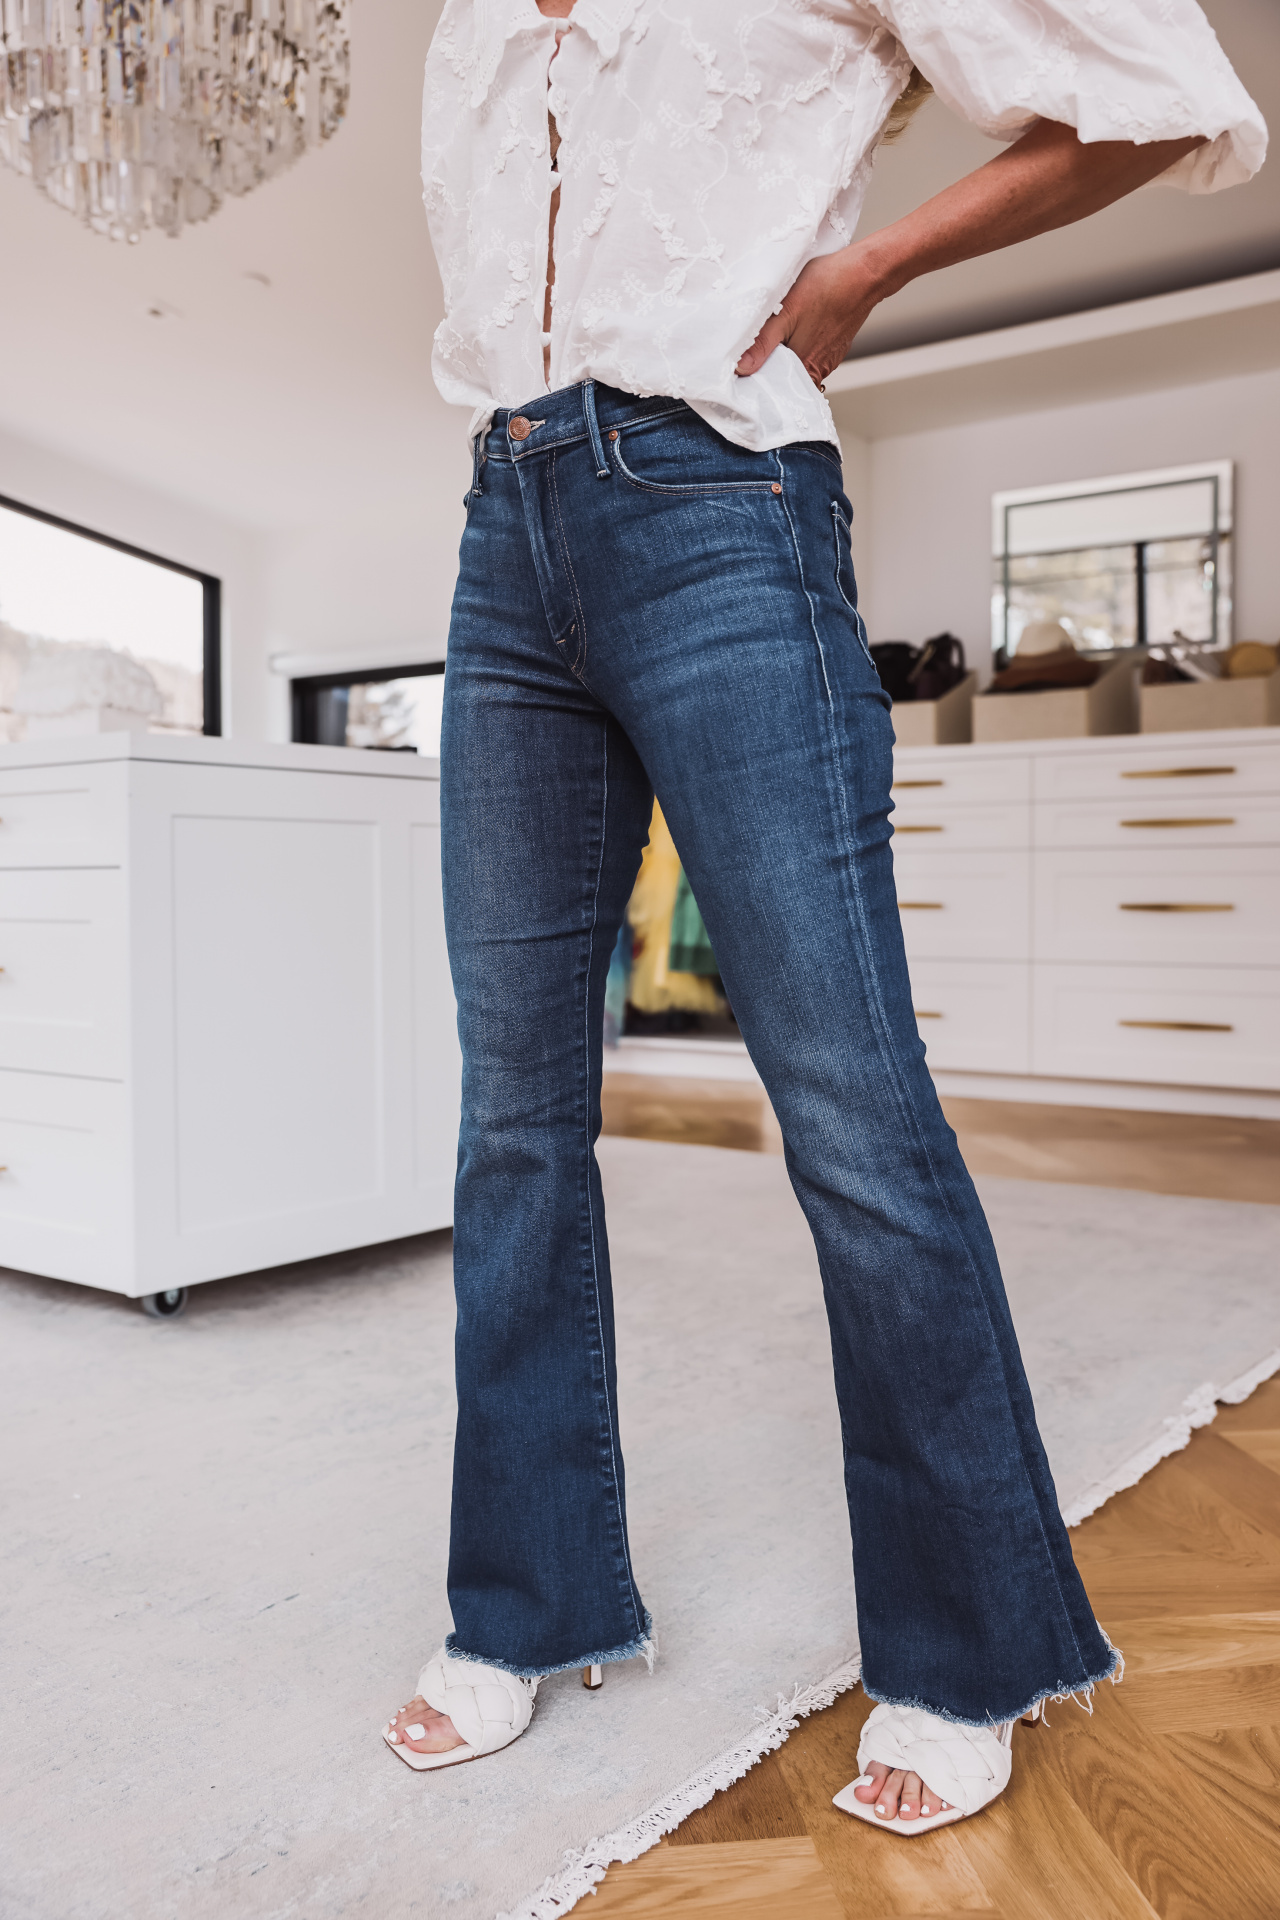 how to pick the right pair of jeans